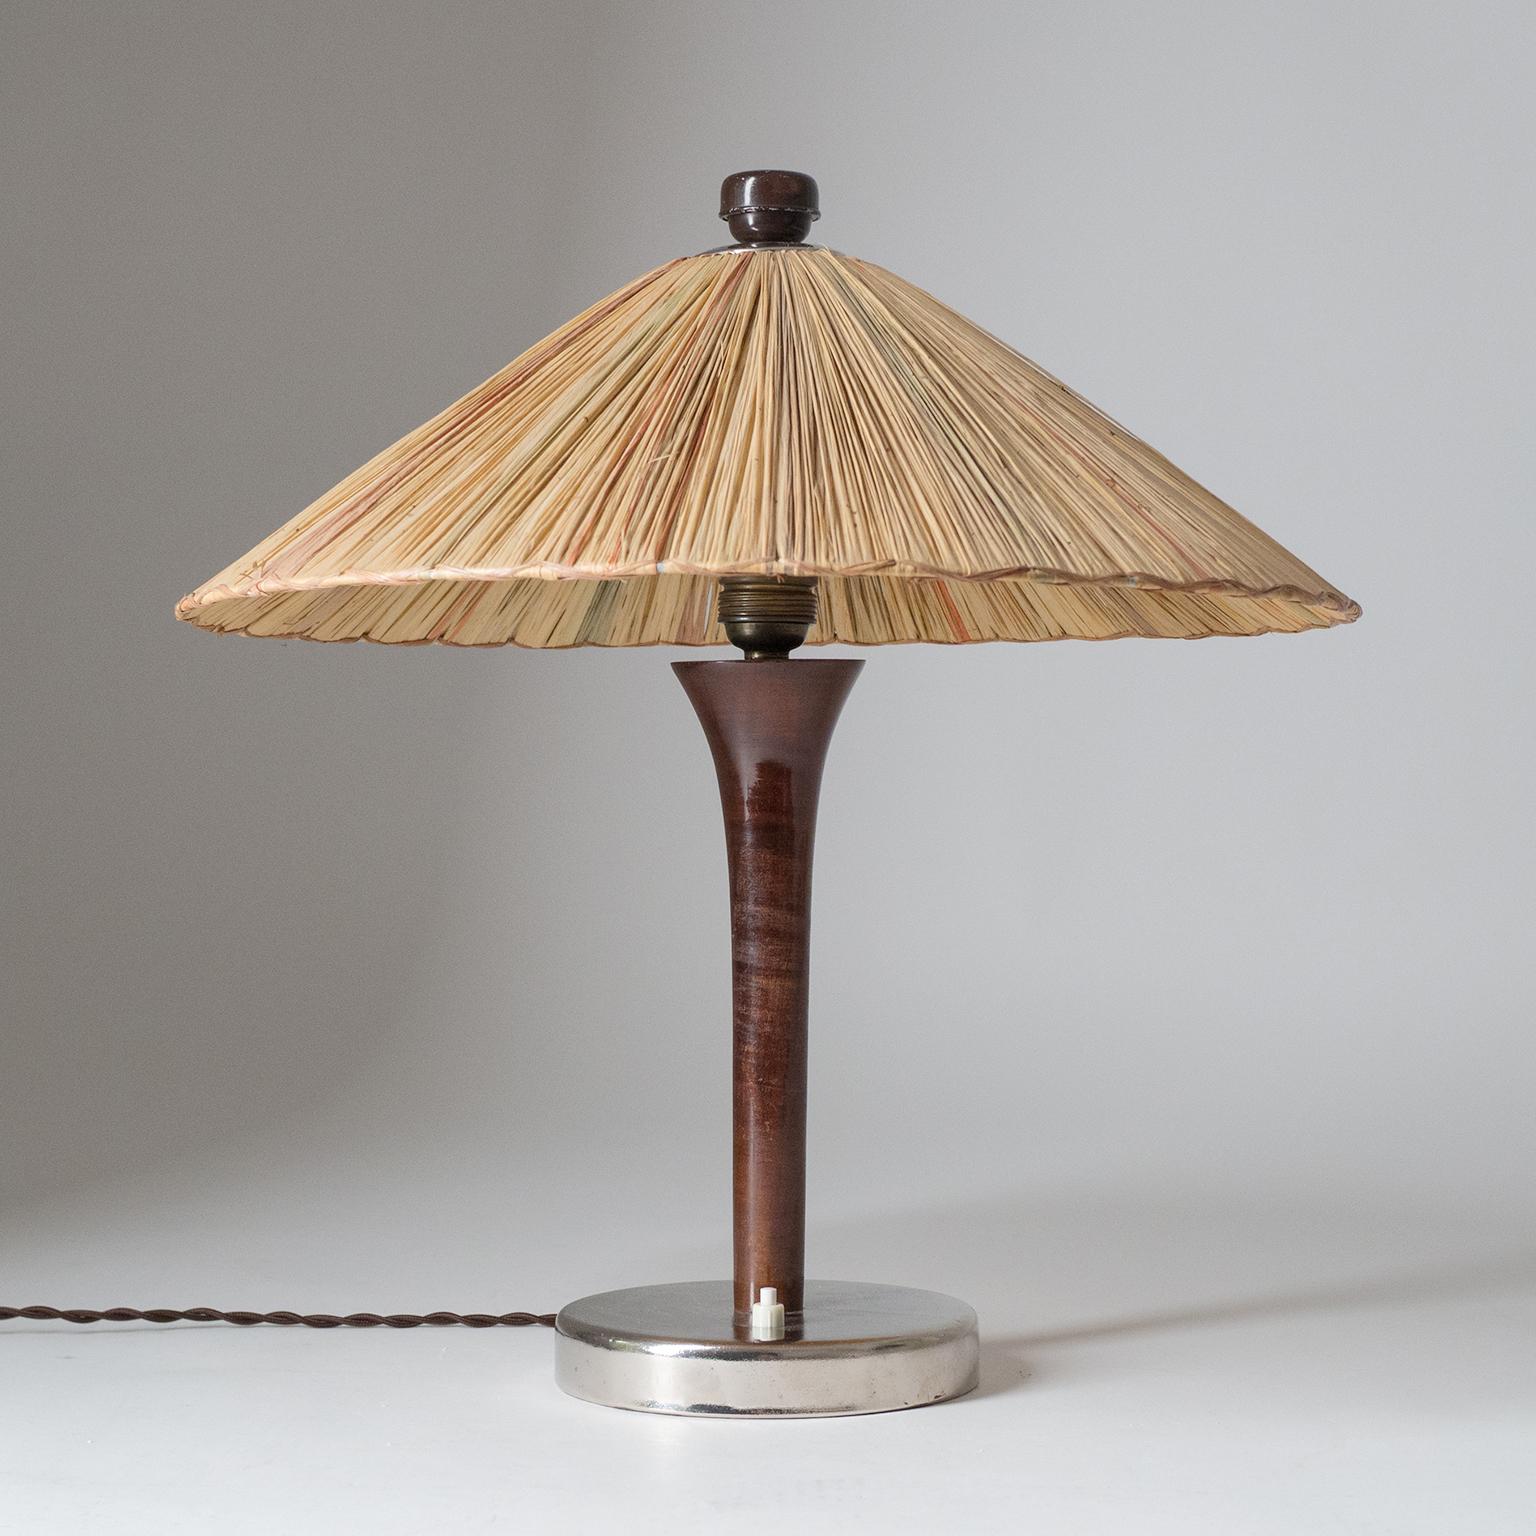 Rare 1930s table lamp with original straw shade. A weighted and chromed base holds a turned Tulip-shaped wooden stem and a large straw shade with different colored elements. Nice original condition with minor patinato the chrome and lacquered